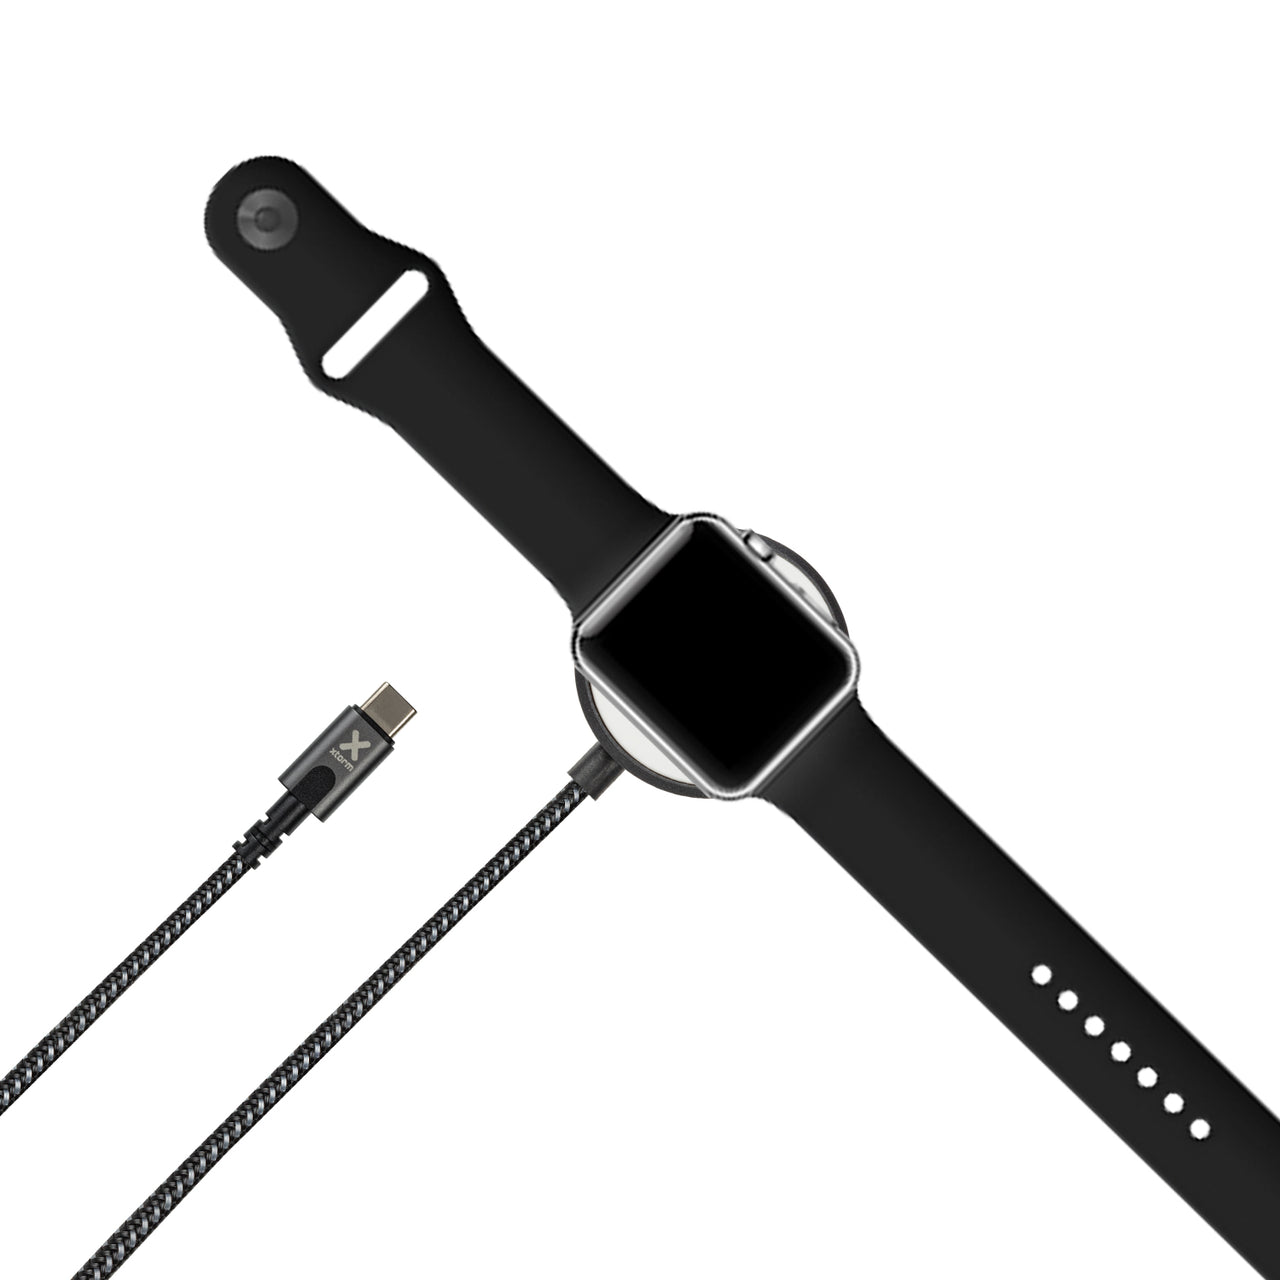 PowerStream Apple Watch Charging Cable - 1.5 meter